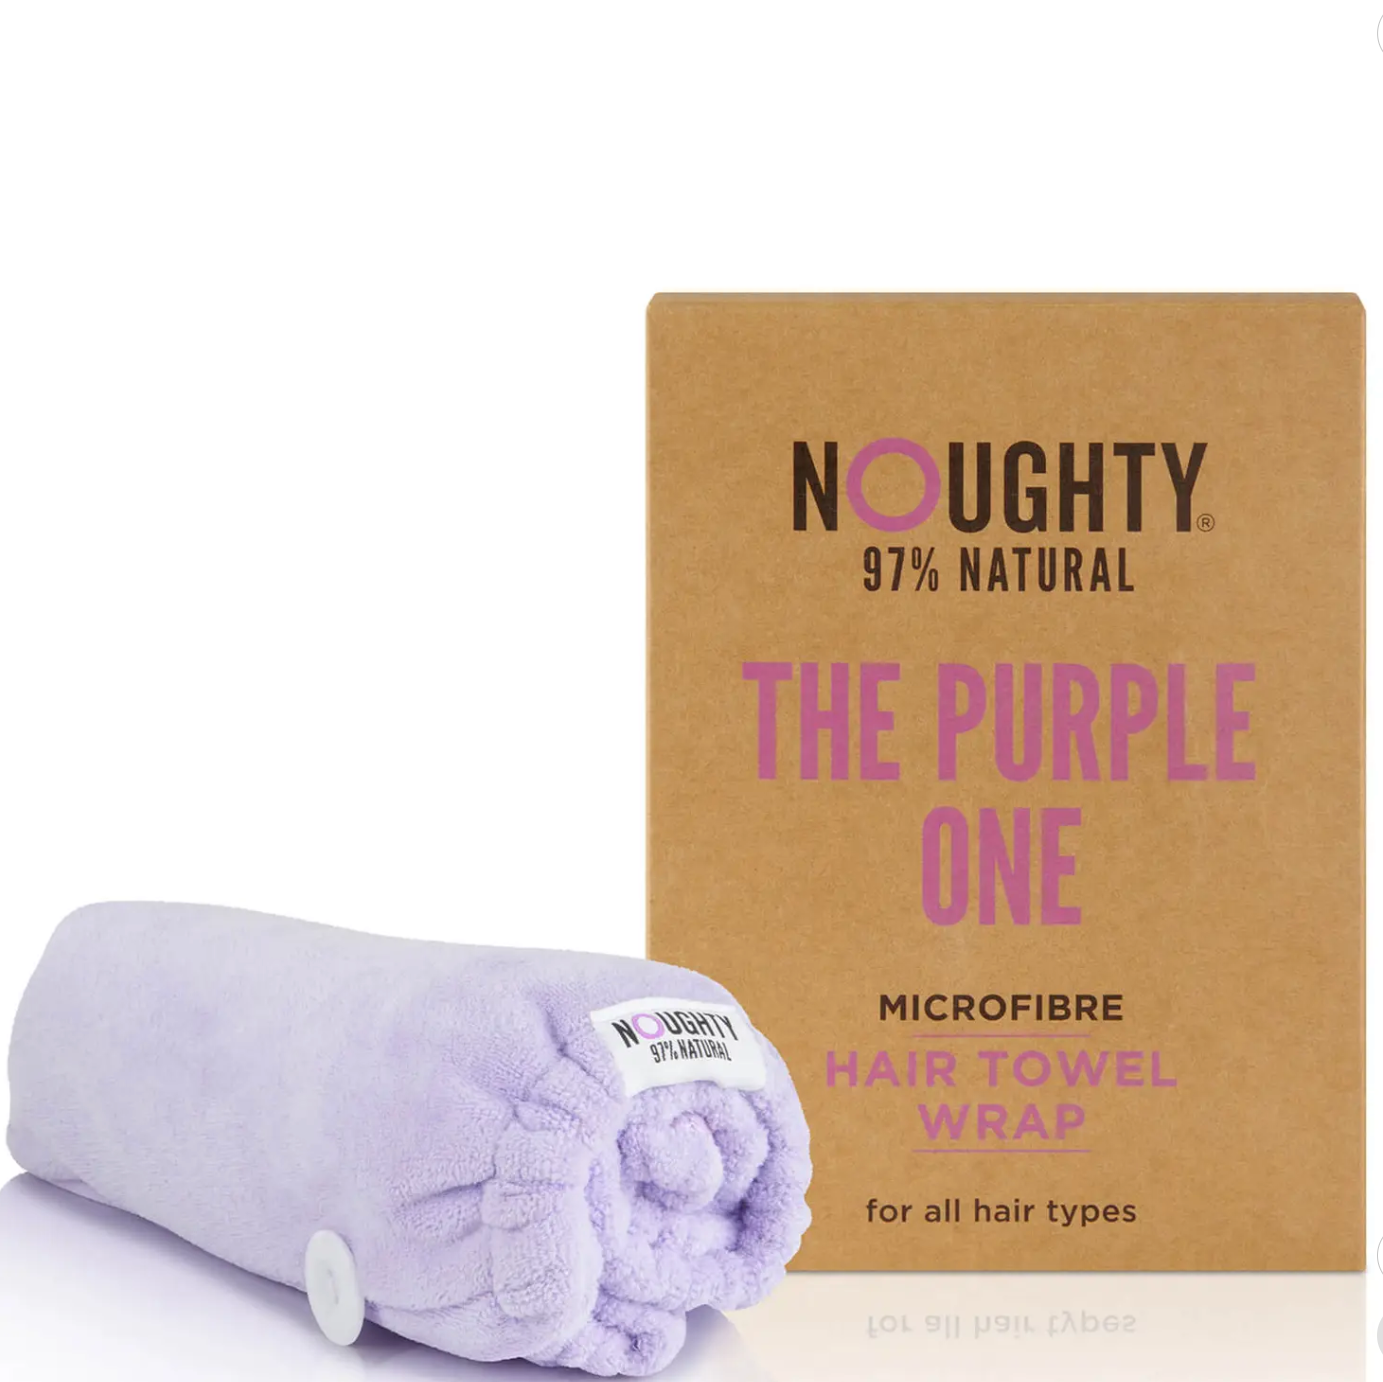 Noughty - Microfibre Hair Towel Wrap - The Purple One